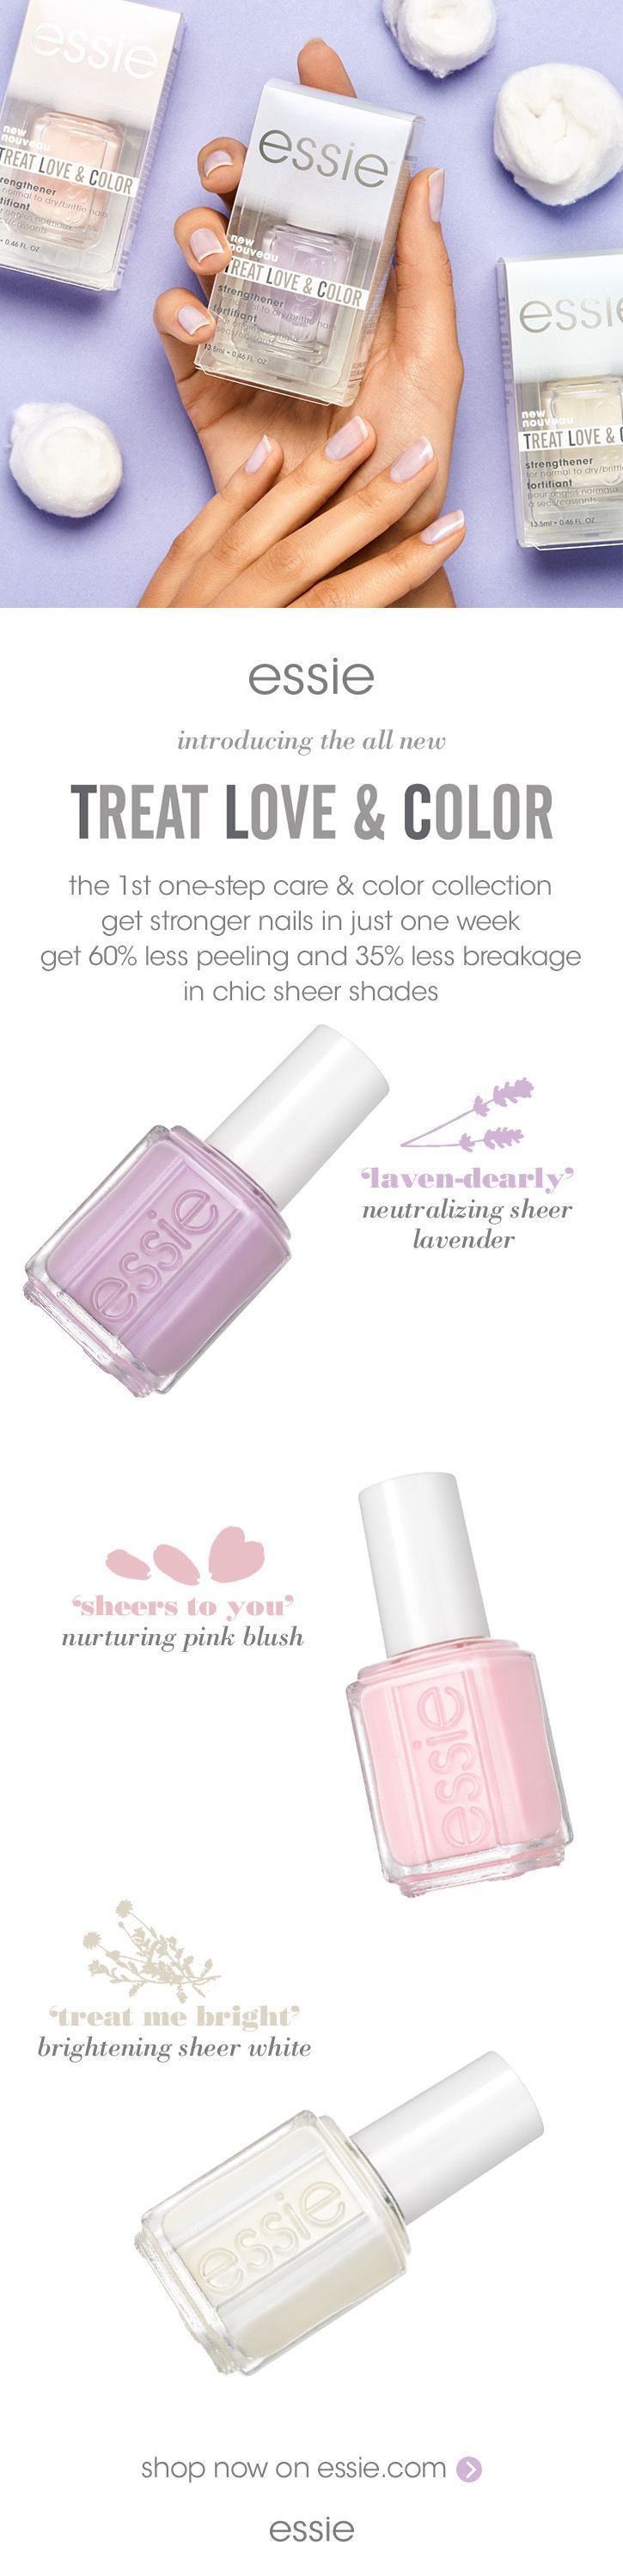 Introducing the all NEW essie TLC — TREAT LOVE laven-dearly a neutralizing sheer lavender, sheers to you a nurturing pink blush